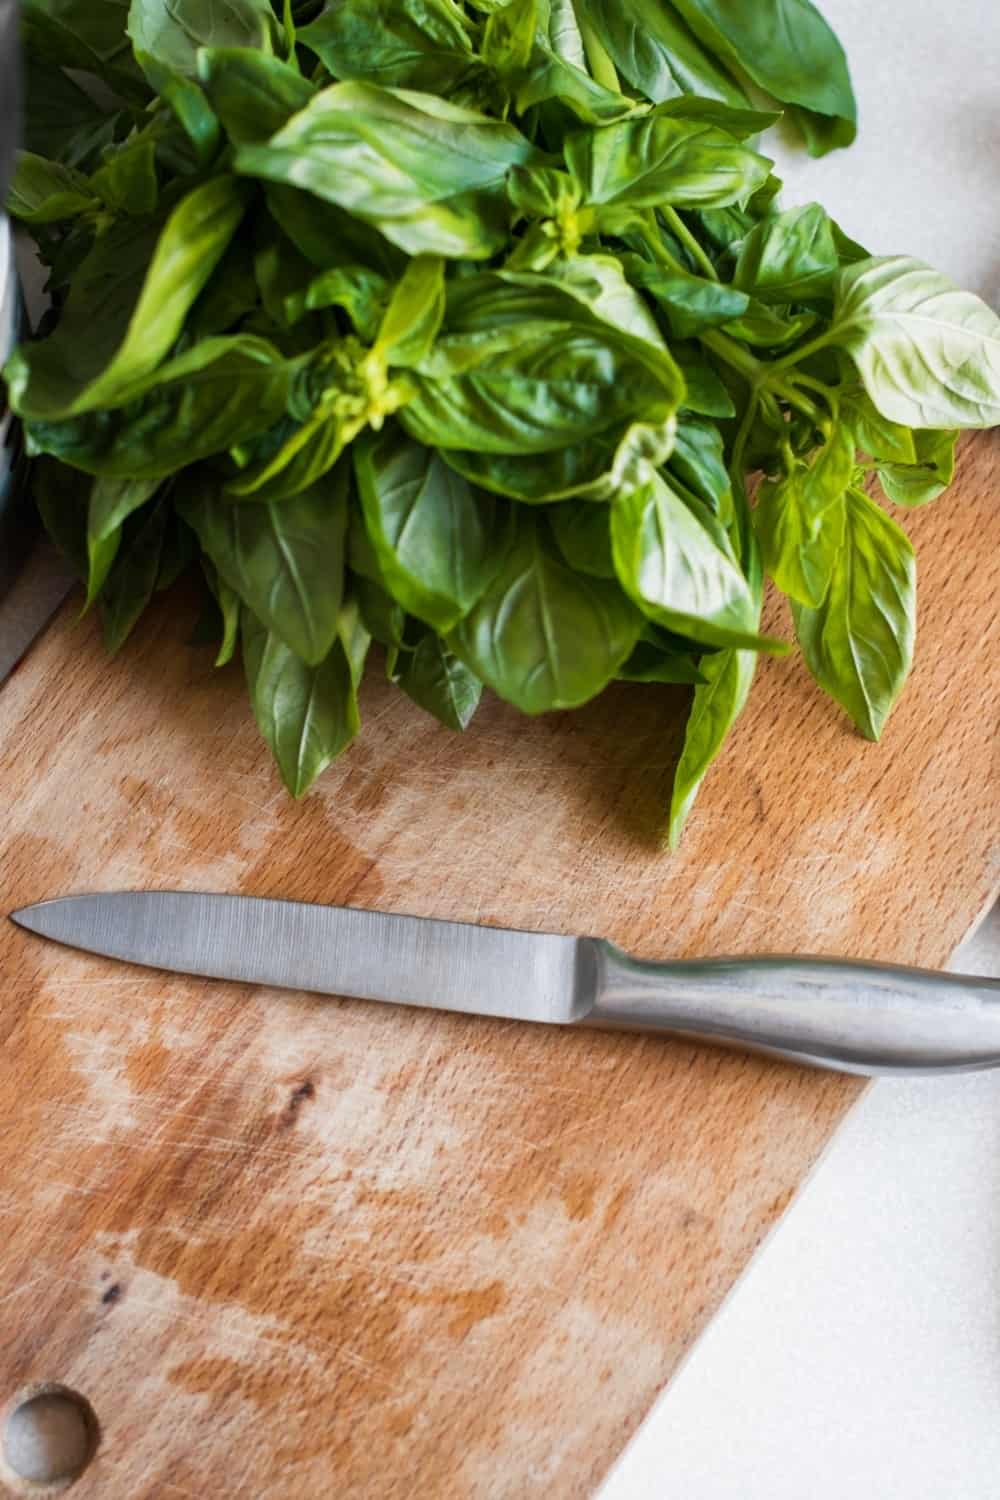 A bunch of basil on the board on the kitchen table, home cooking utensils for cooking